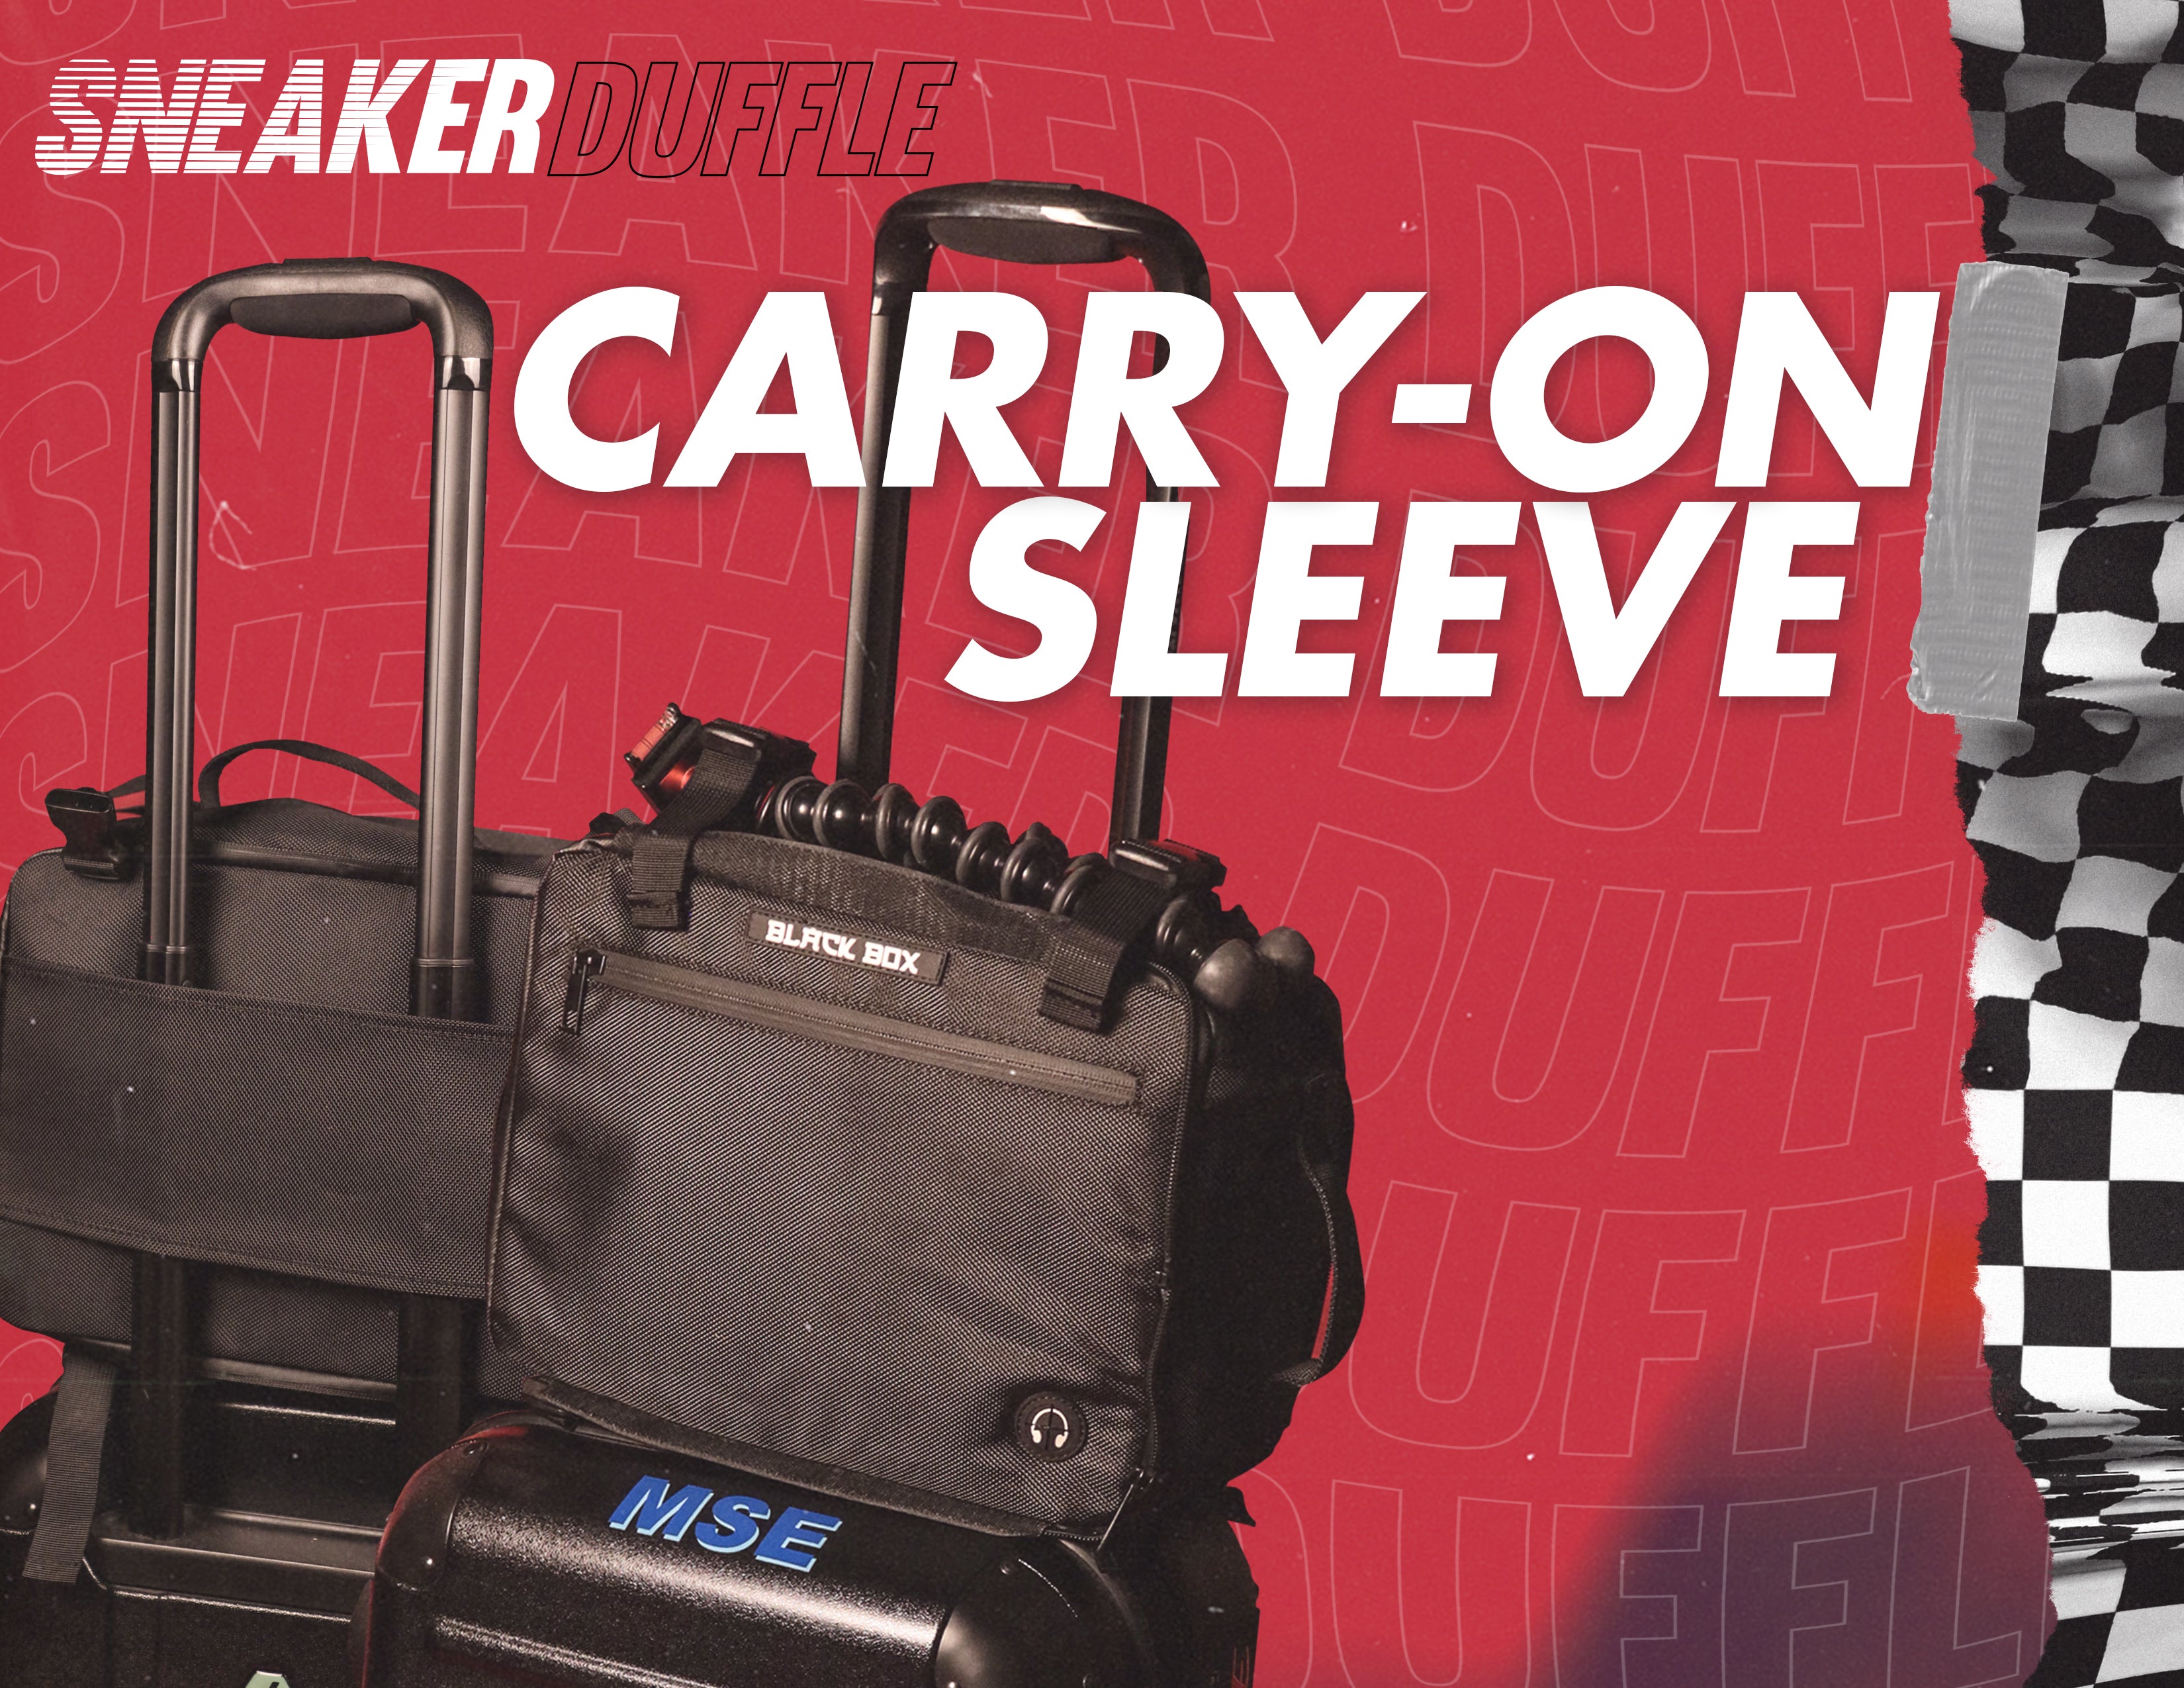 On the back of the Black Box Media camera bag is a sleeve designed to slide on top of your carry-on hand rails so that you don't have to carry anything extra while traveling